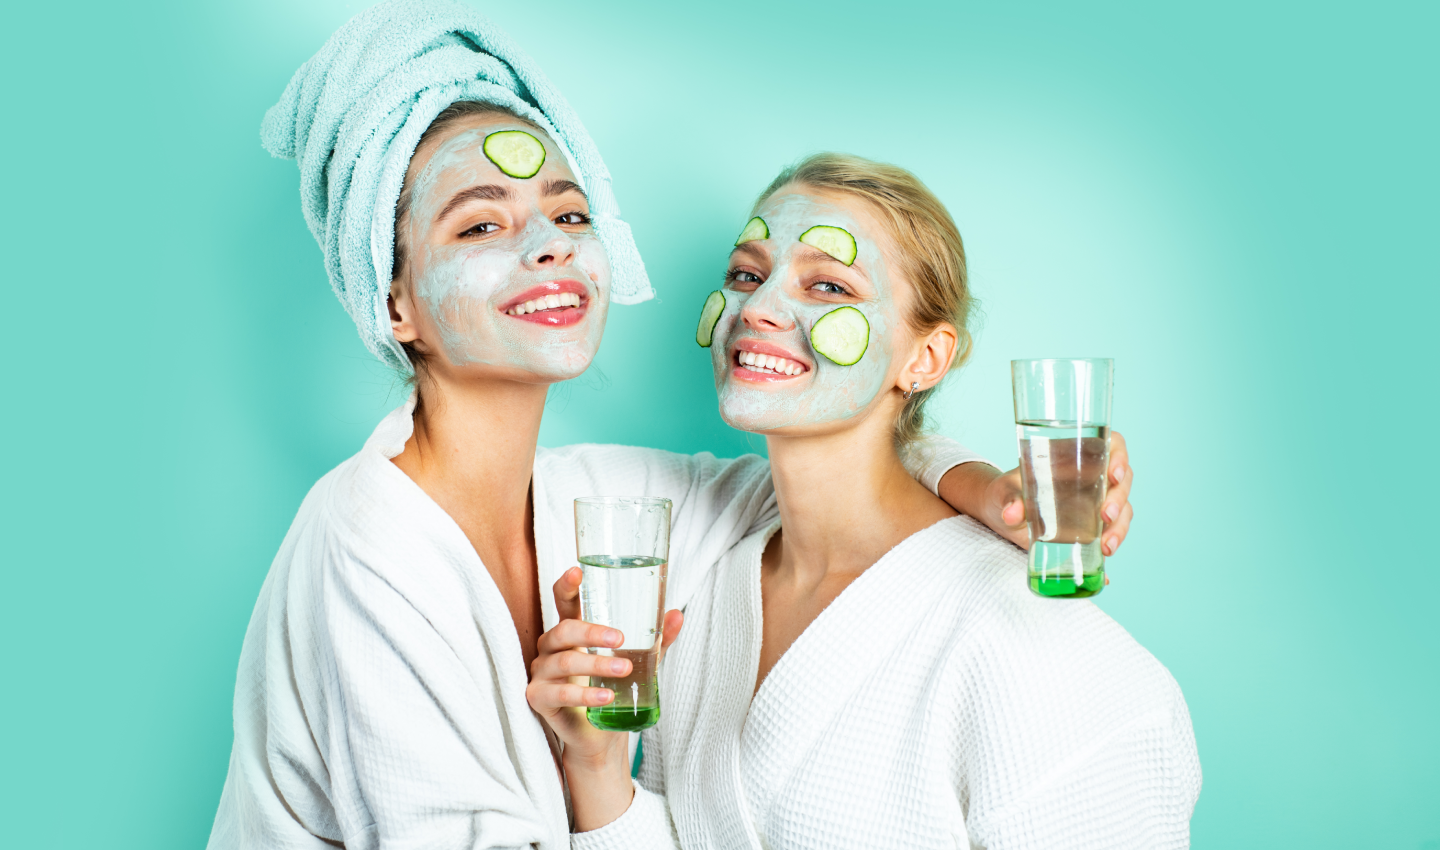 Two women smiling with facial masks on and holding glasses of water, representing Hydra Facial for hydration